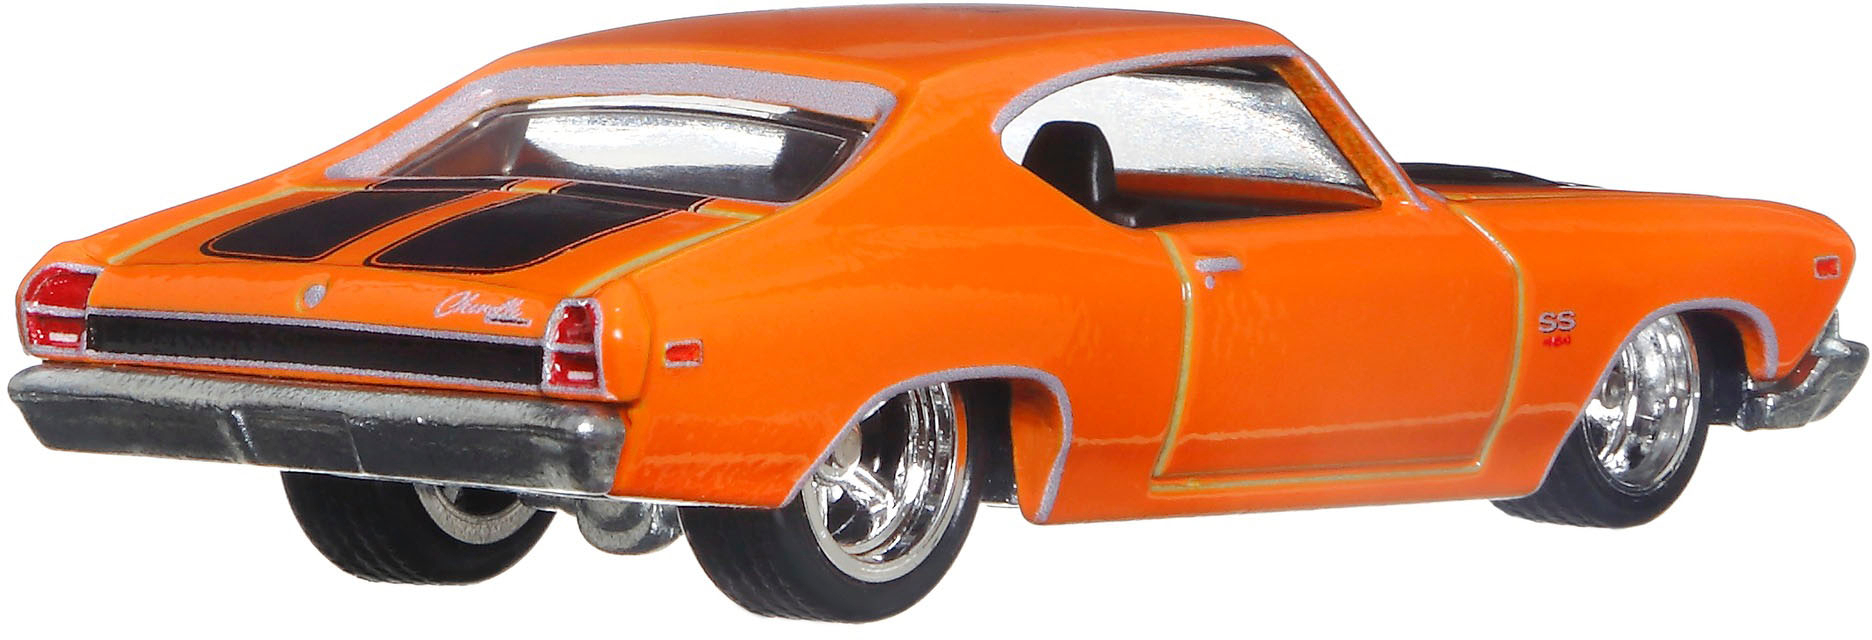 Hot Wheels Premium Car Culture American Scene Vehicles with 5-Pack  Container HFF44 - Best Buy